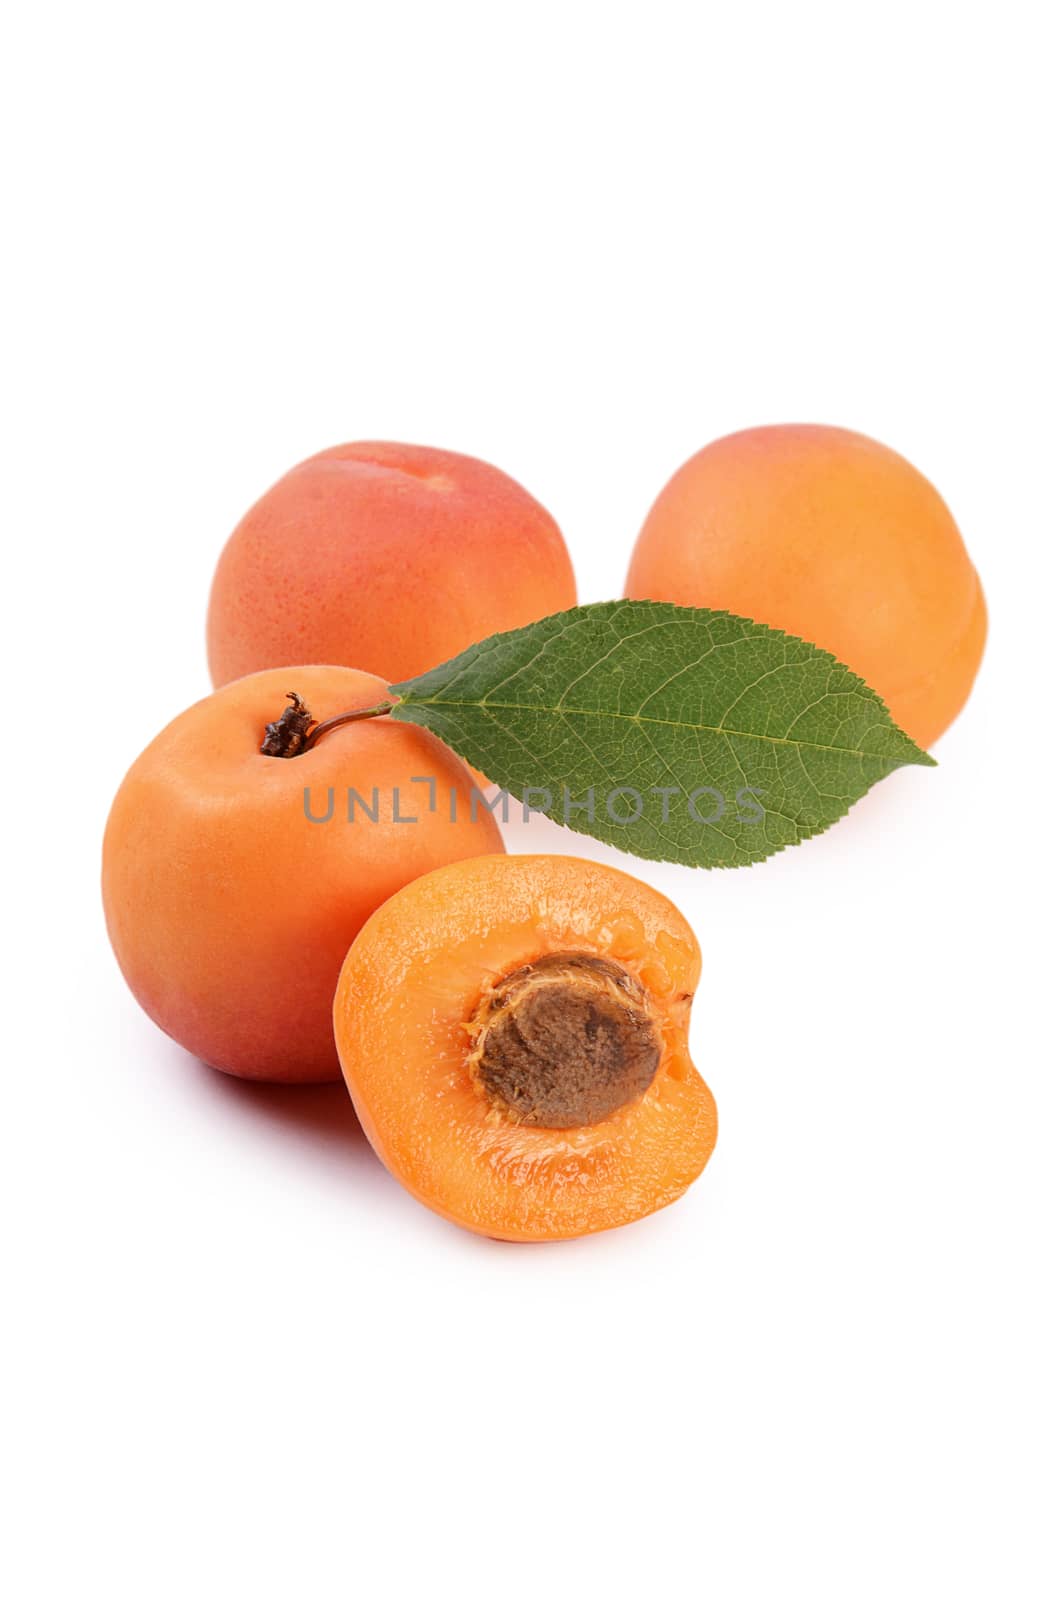 The fresh apricot with a leaf isolated